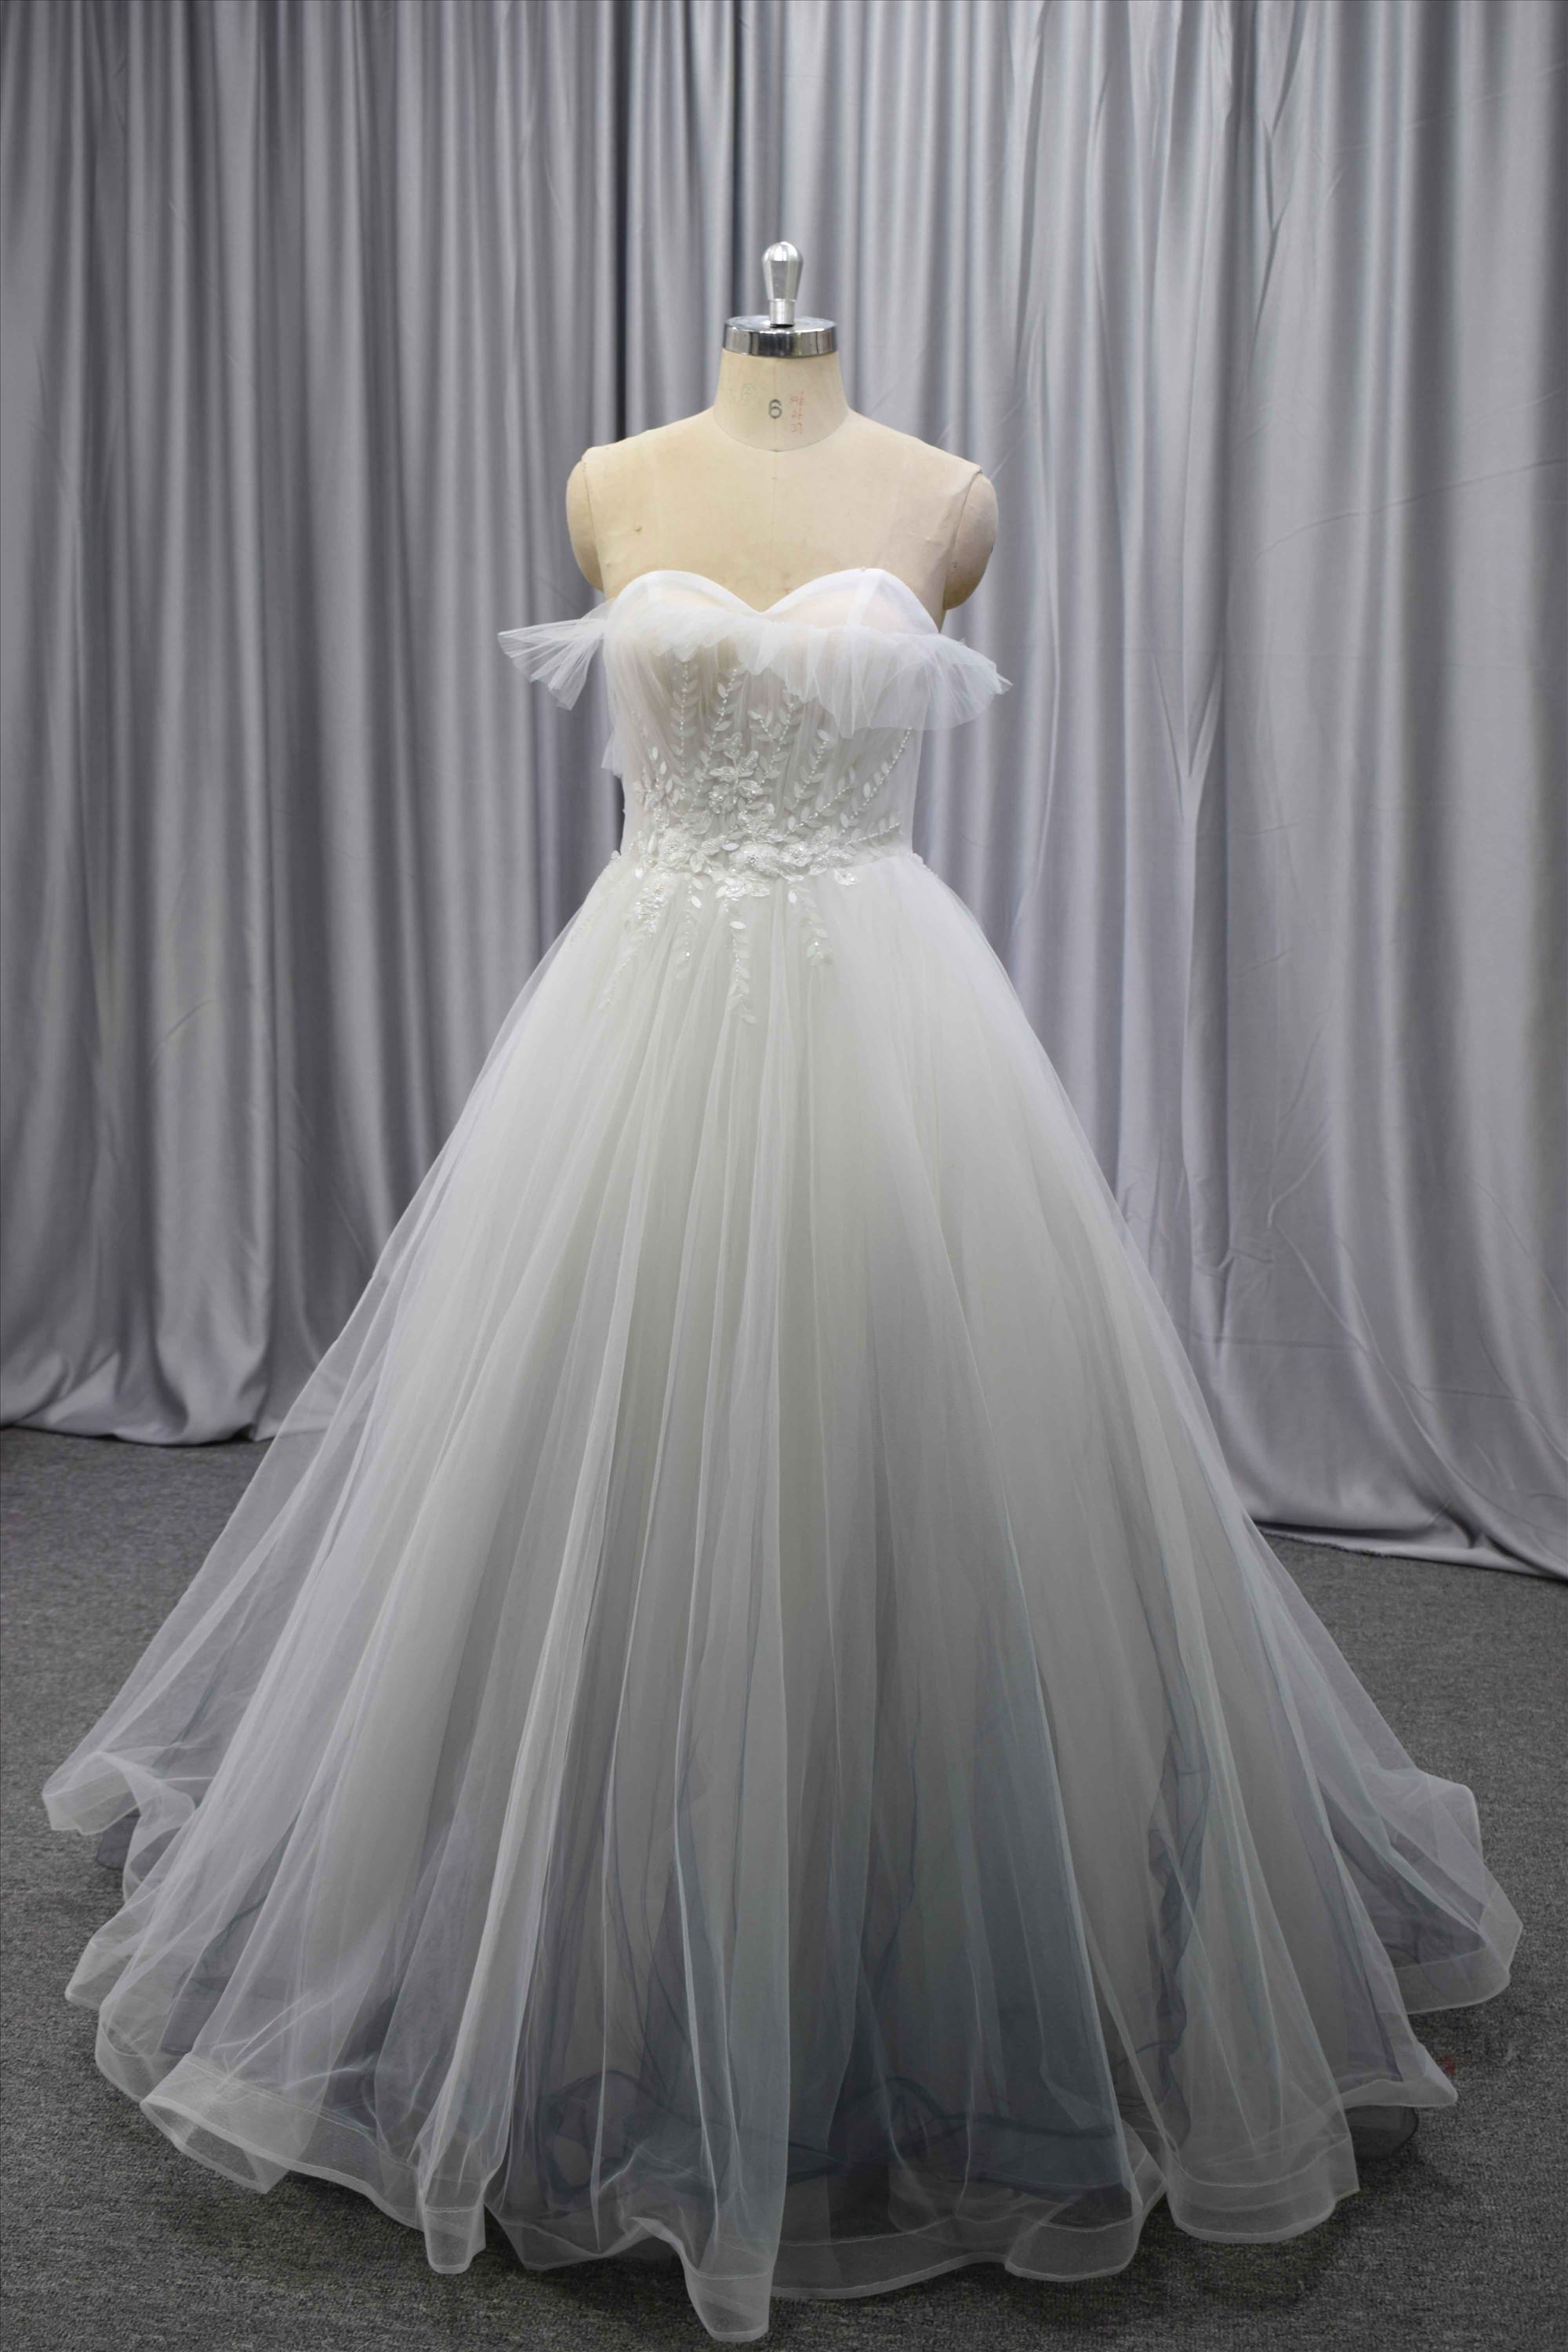 Guangzhou factory made wedding dress wholesale price wedding gown